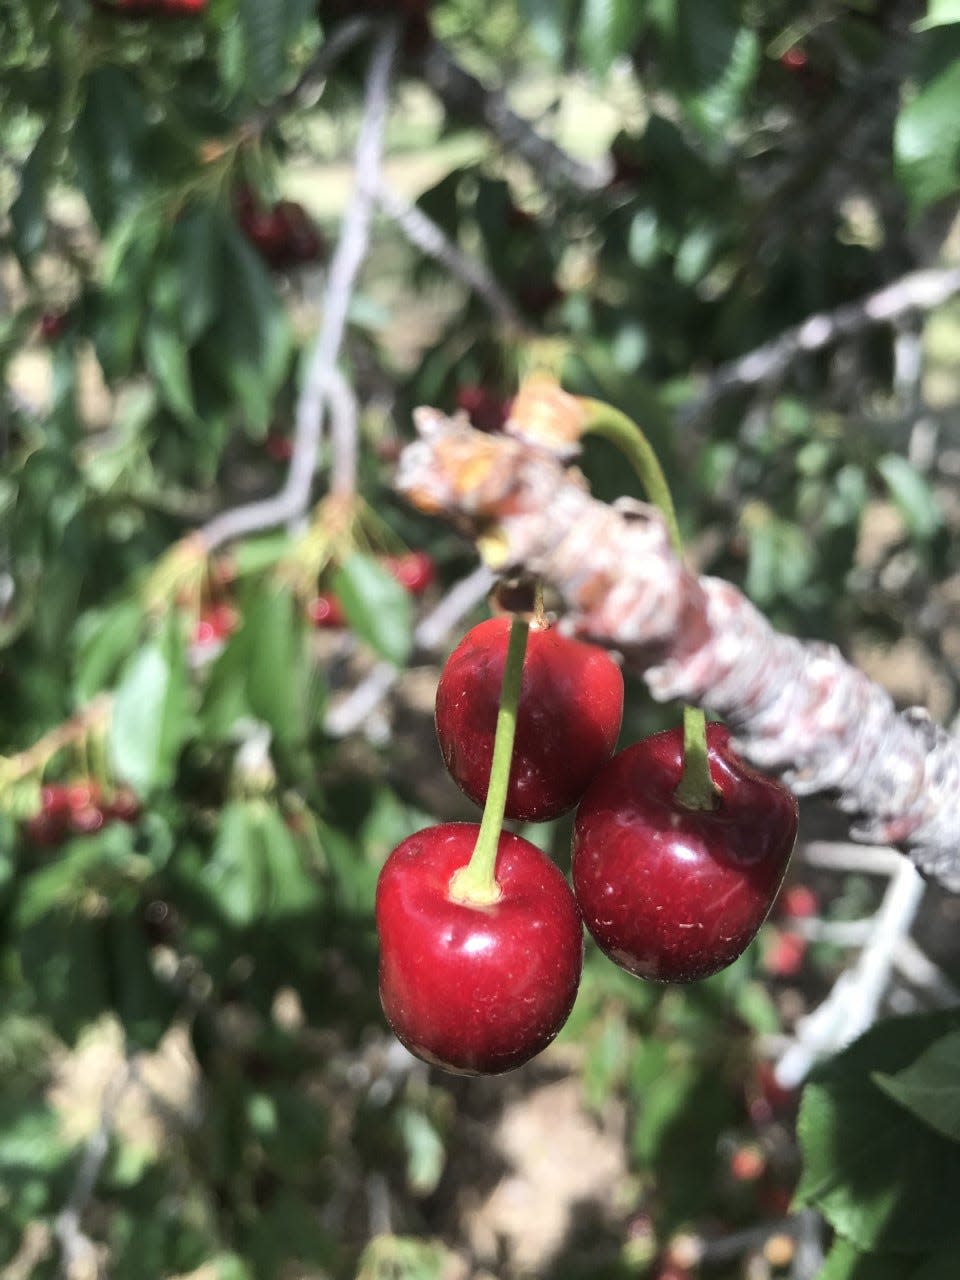 Celebrate dad by taking him to the Cherry Festival on Saturday and Sunday at the Nichols Ranch, 236 Cottonwood Canyon, in La Luz, New Mexico.